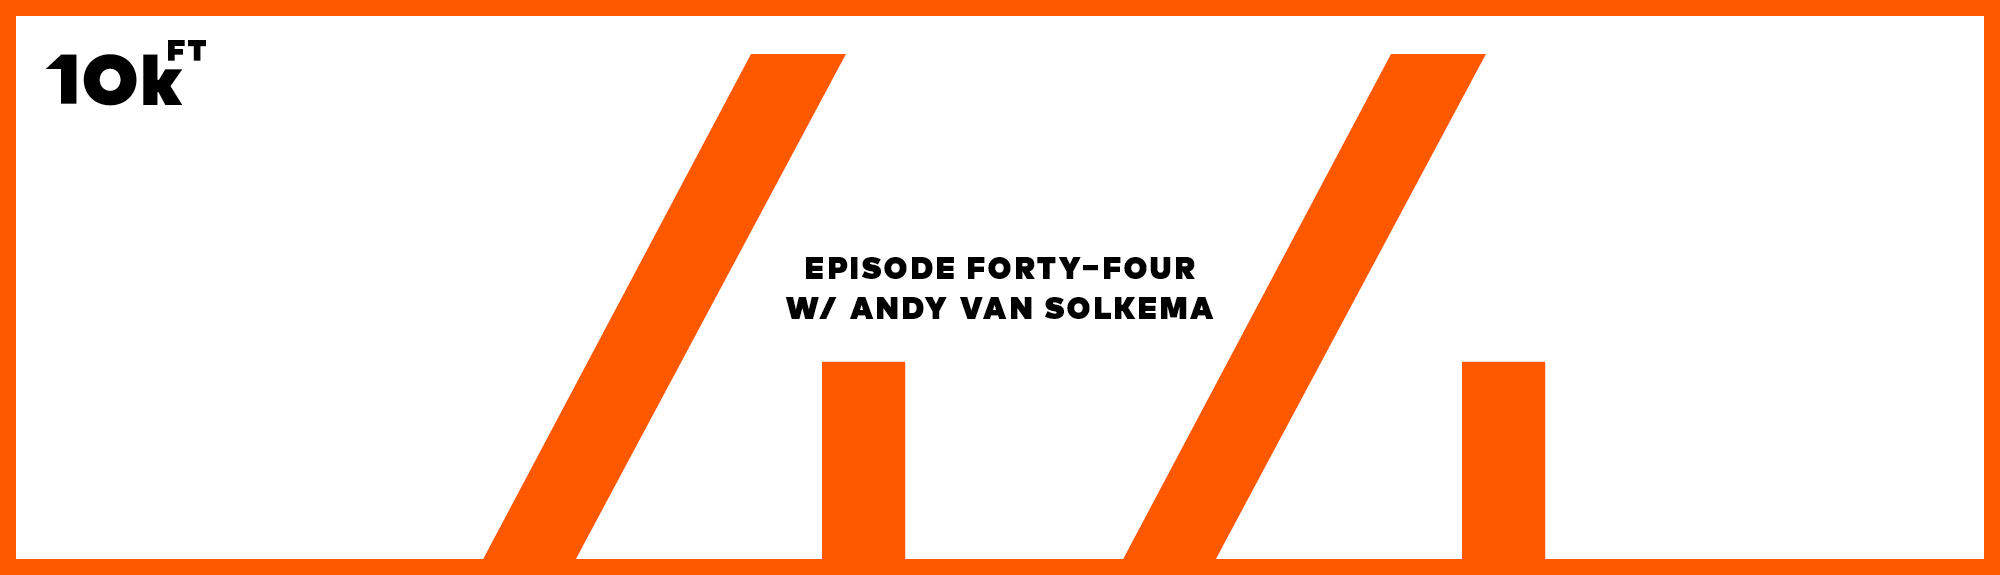 Orange rectangle with a white inside background. Top right corner has "10k ft" written. In the middle, the text reads "Episode Forty-Four w/ Andy Van Solkema". A large "44" is written in orange behind this middle text